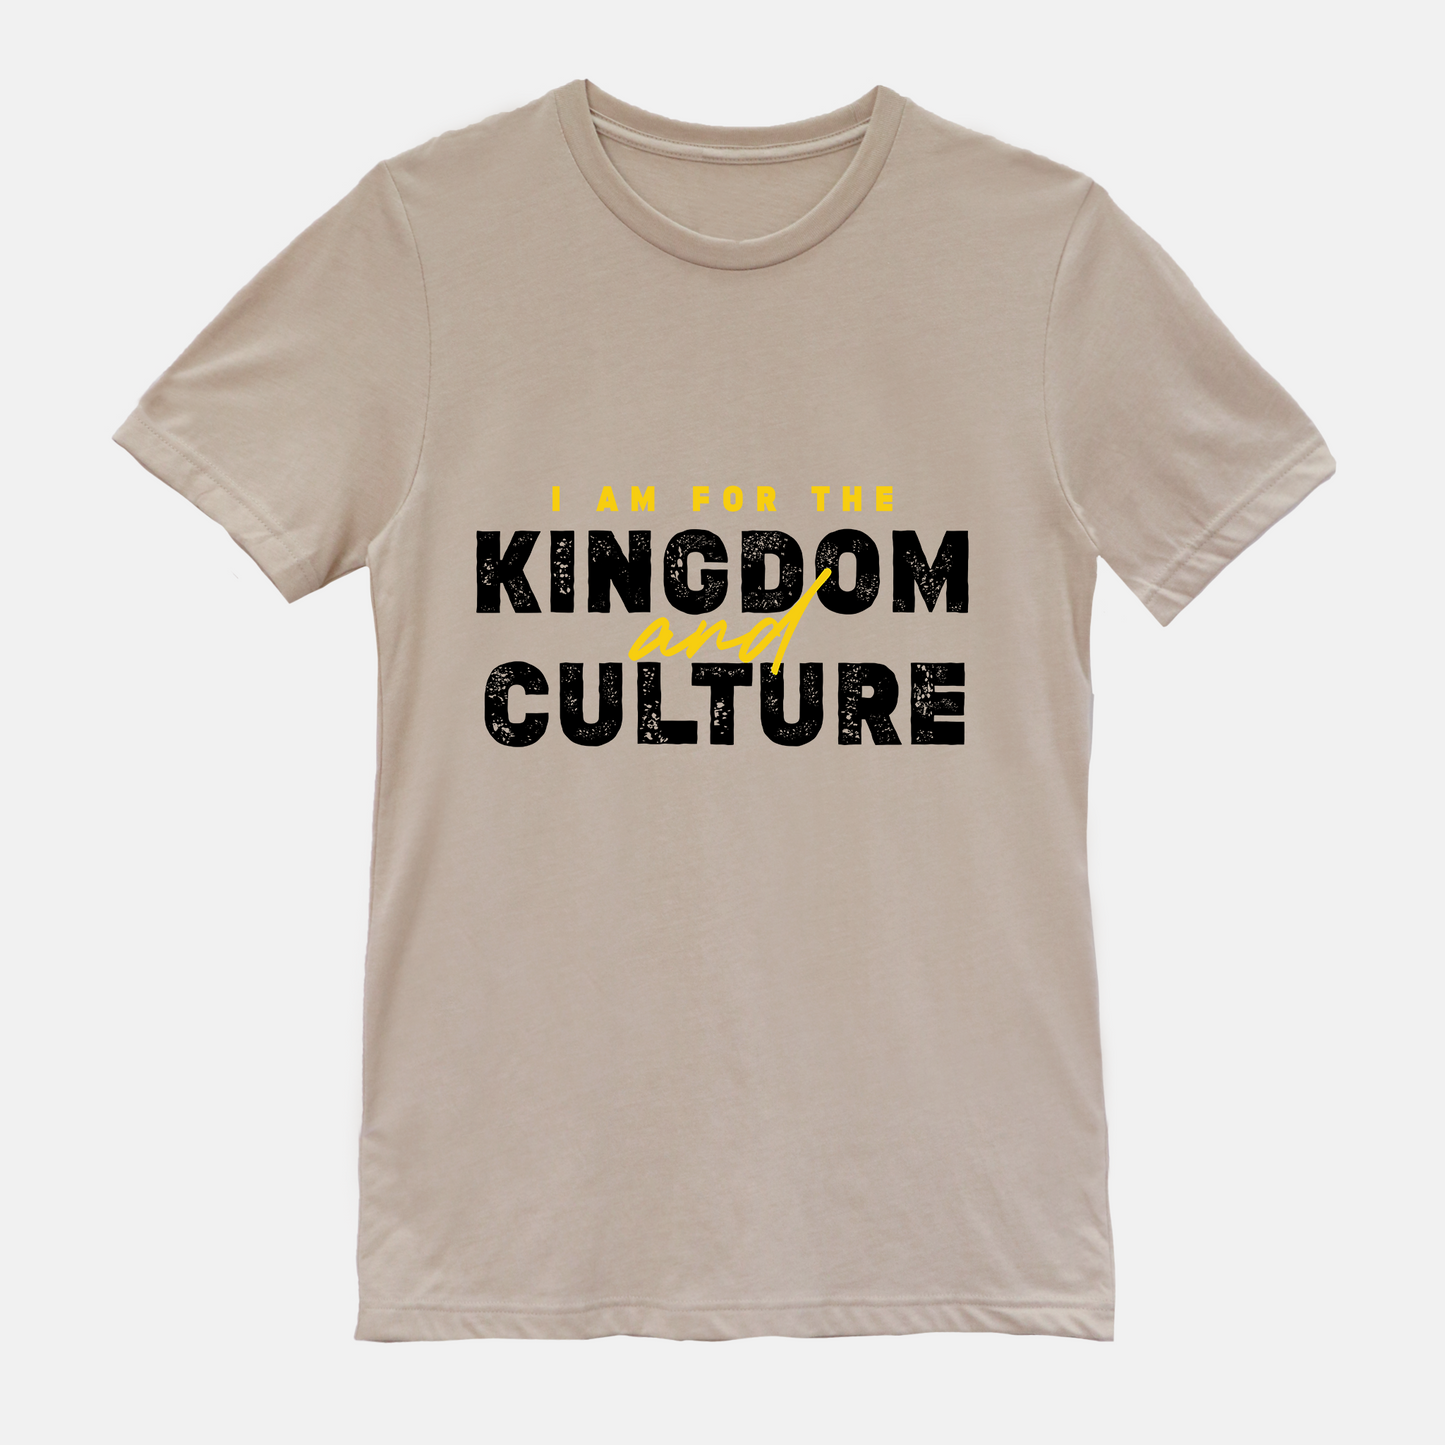 I Am For The Kingdom and Culture Tee